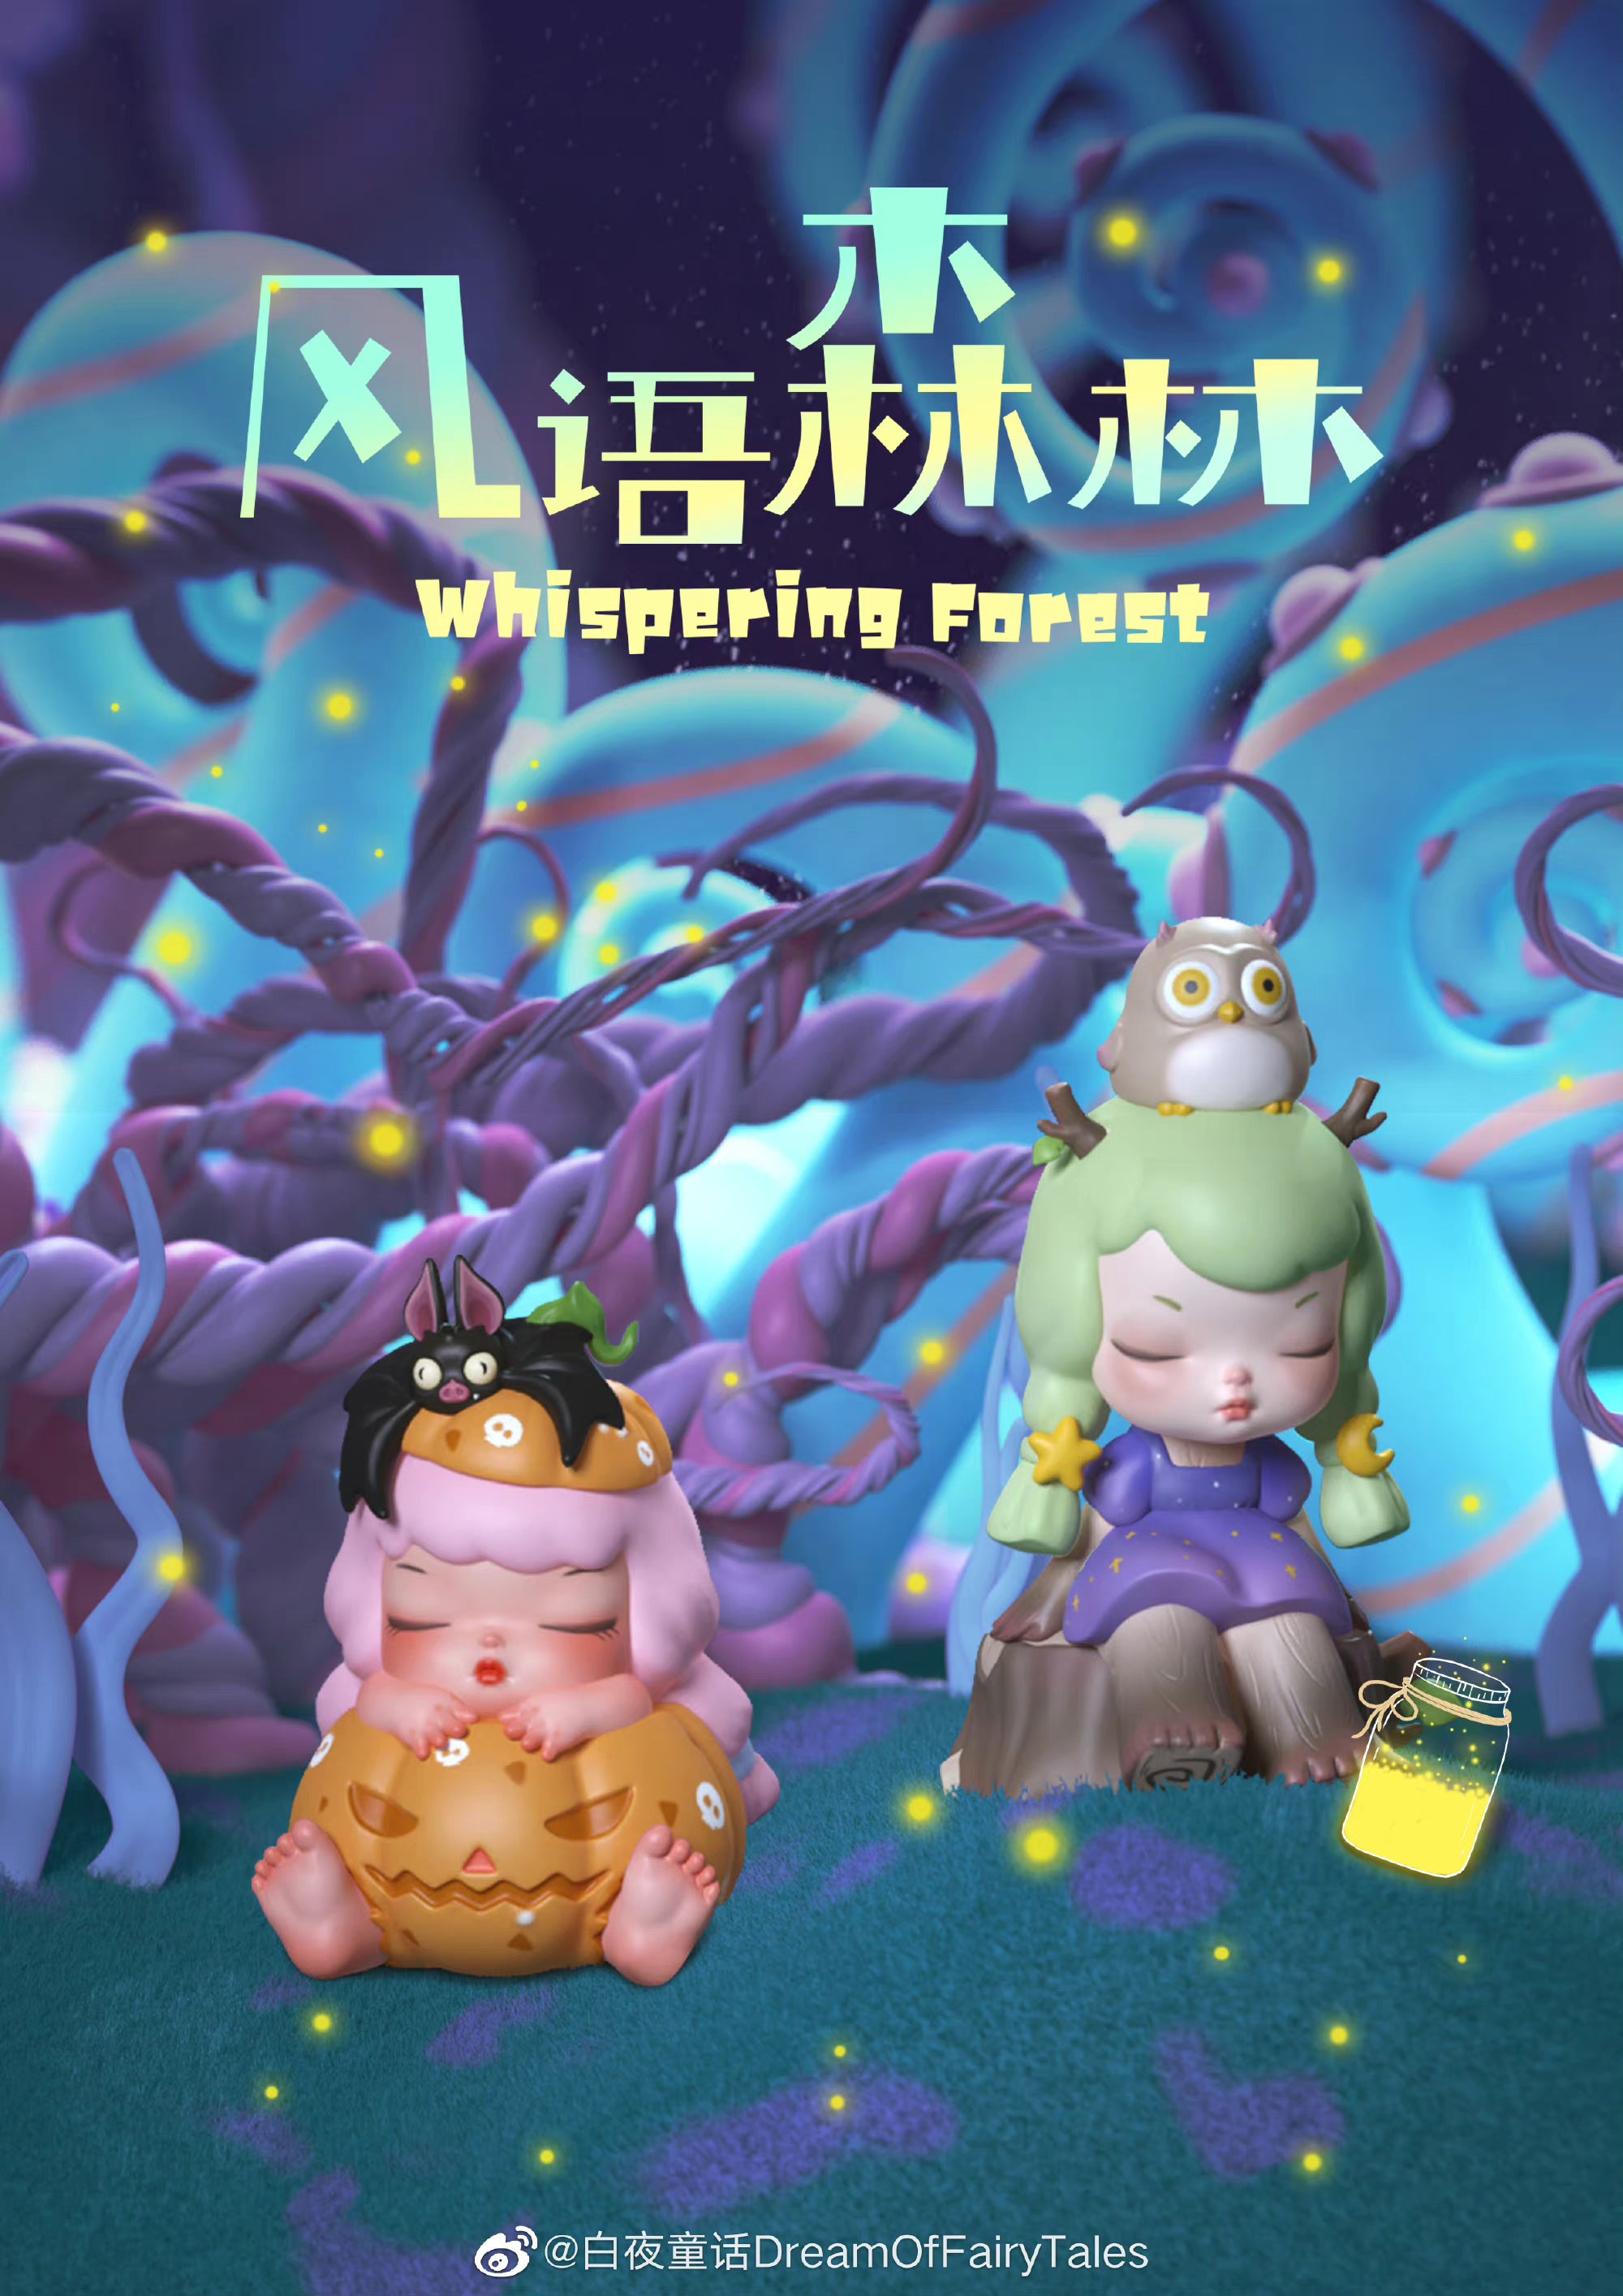 Cartoon puppet girl with owl figurine on pumpkin candy in Whispering Forest by Kemelife.